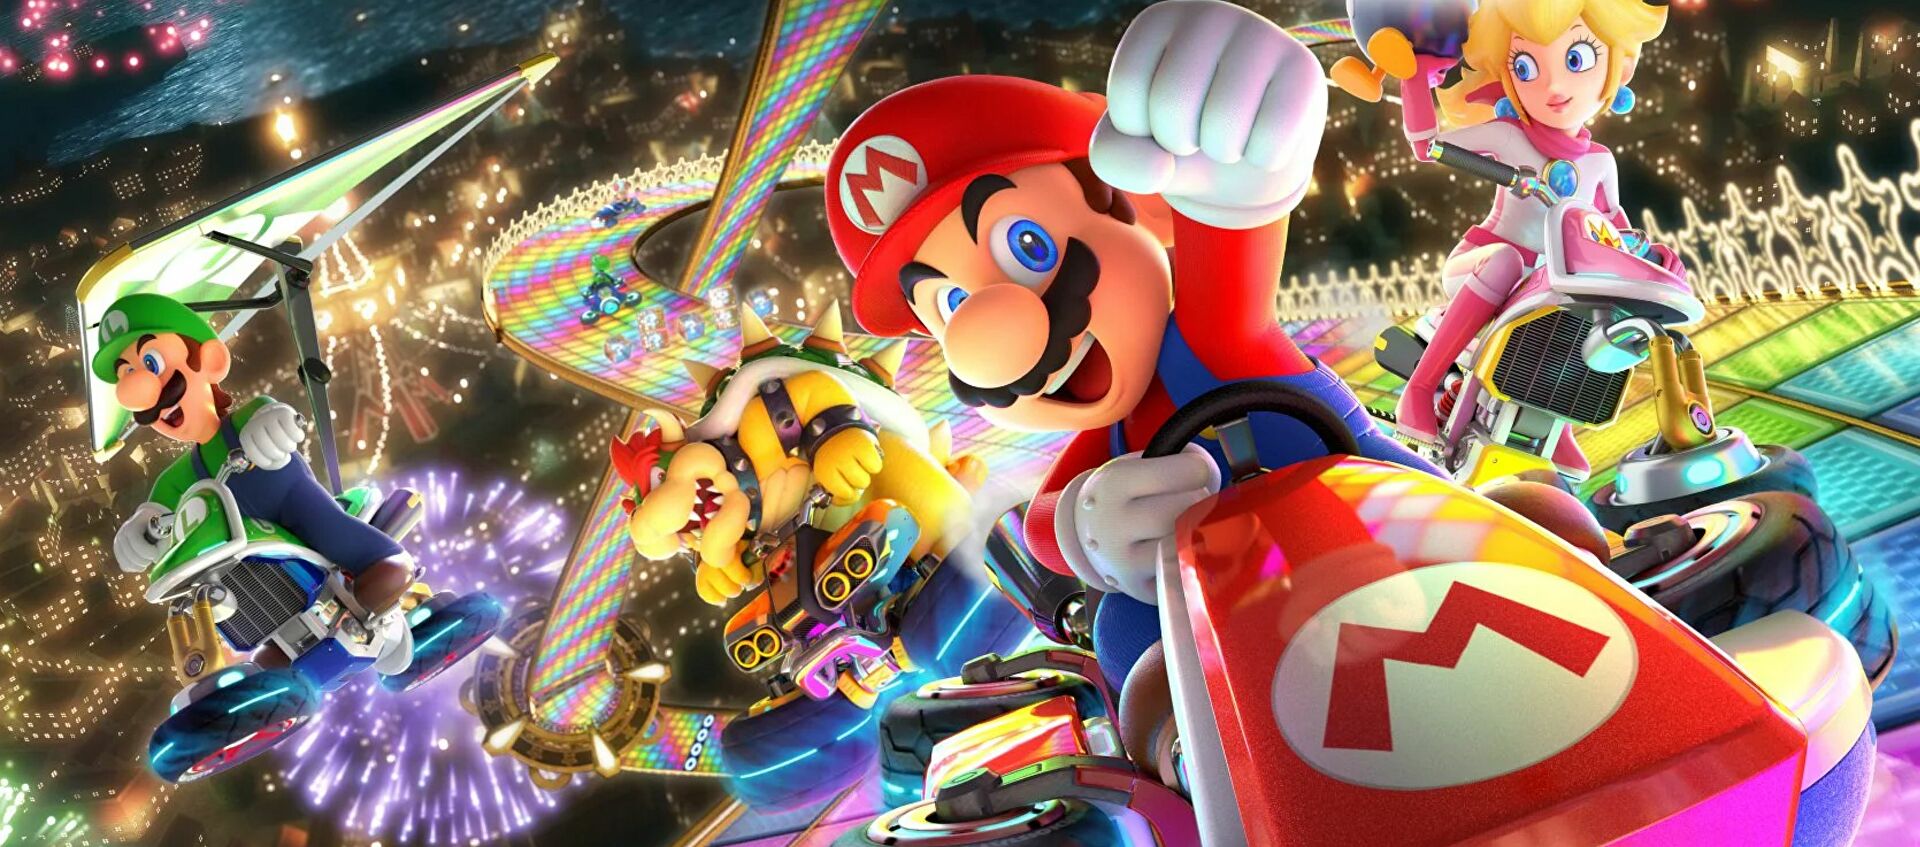 Nintendo teases Mario Kart 8 Deluxe Booster Course Wave 3 by showing off two of its tracks